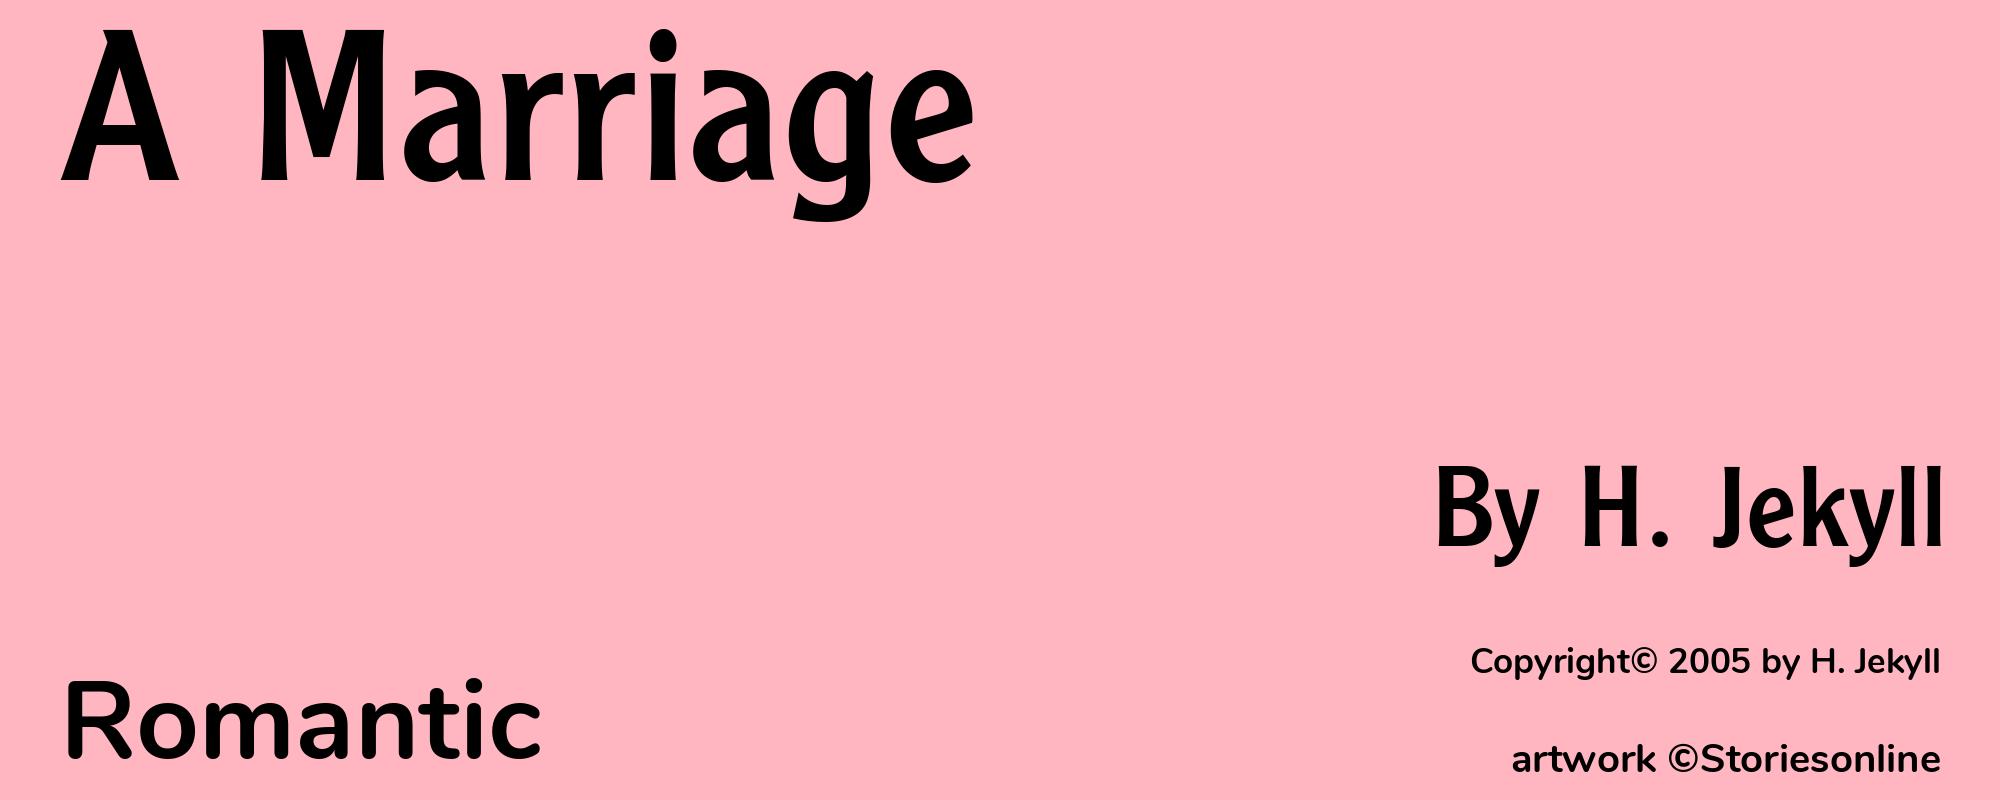 A Marriage - Cover